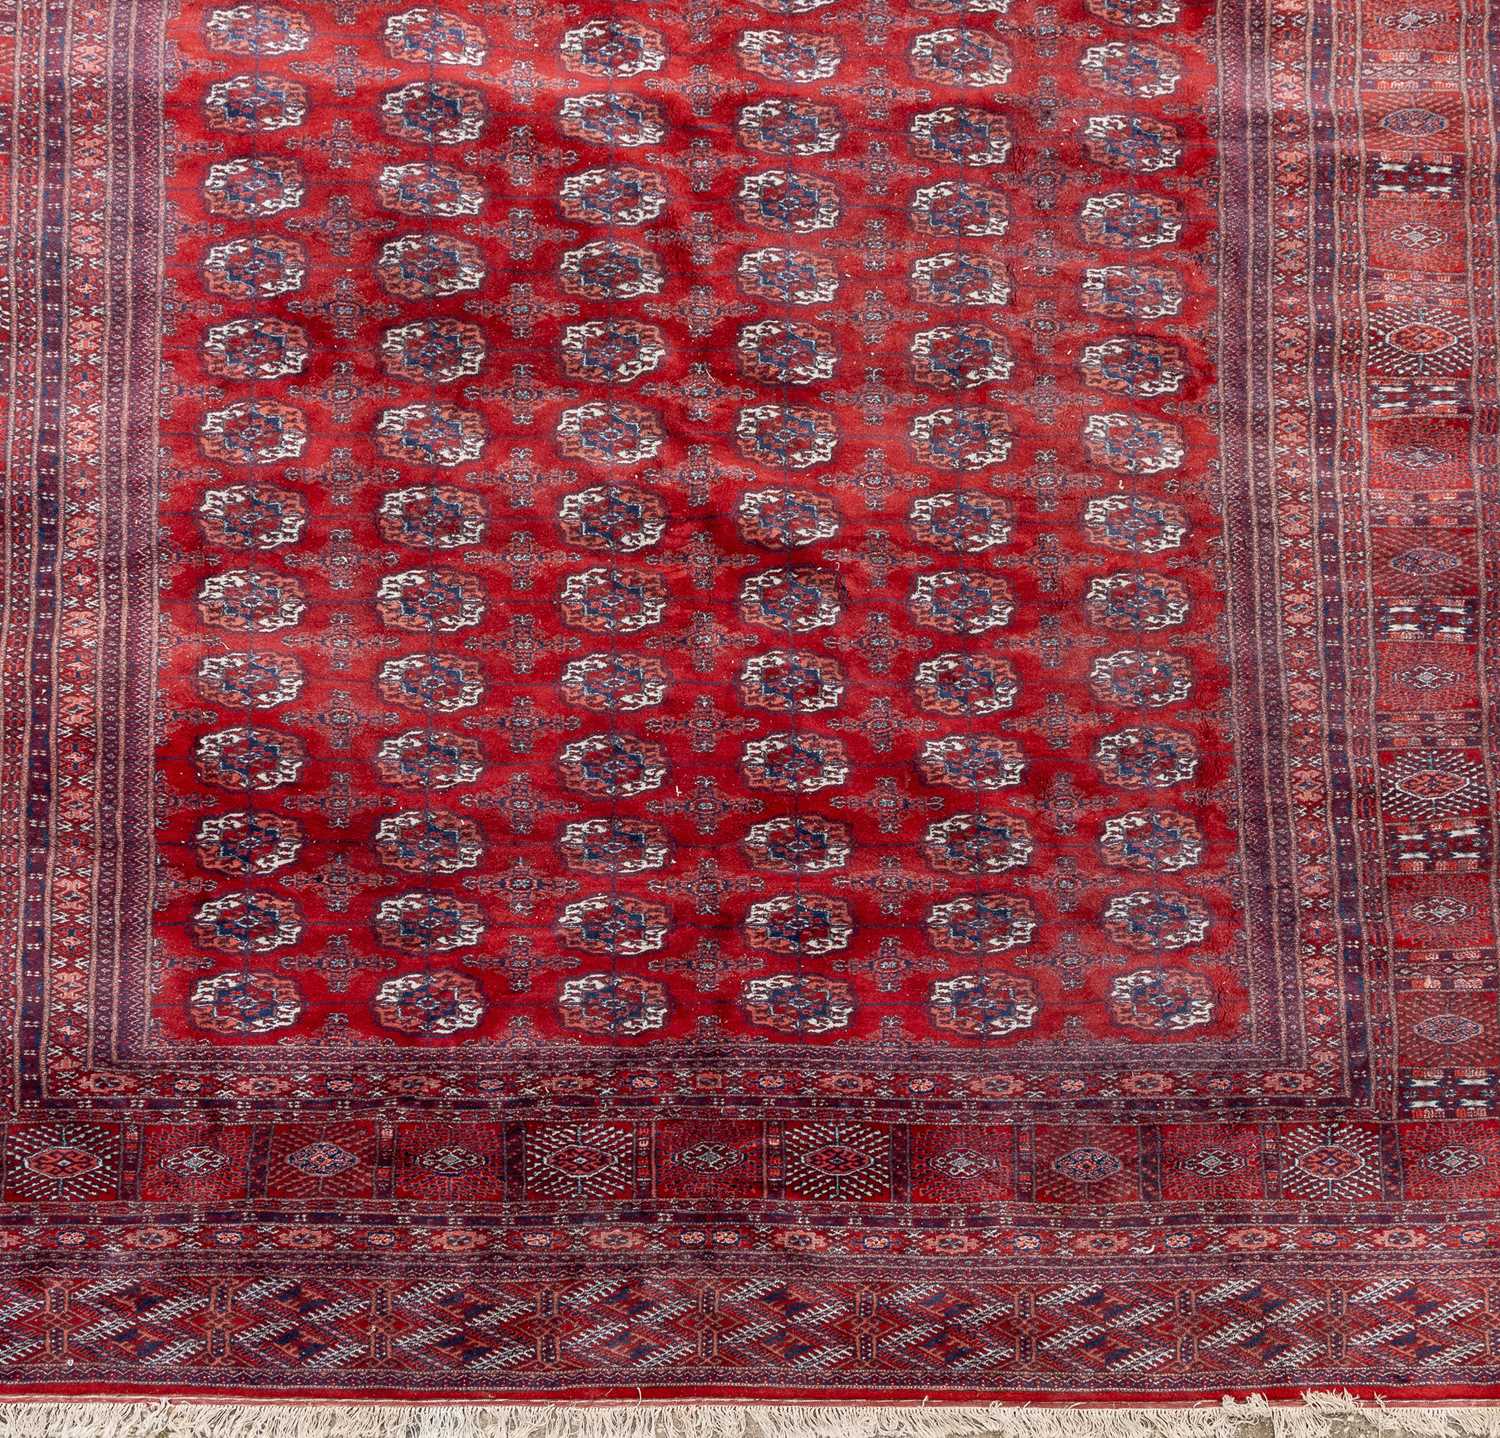 A Baluchi style red ground carpet - Image 2 of 3